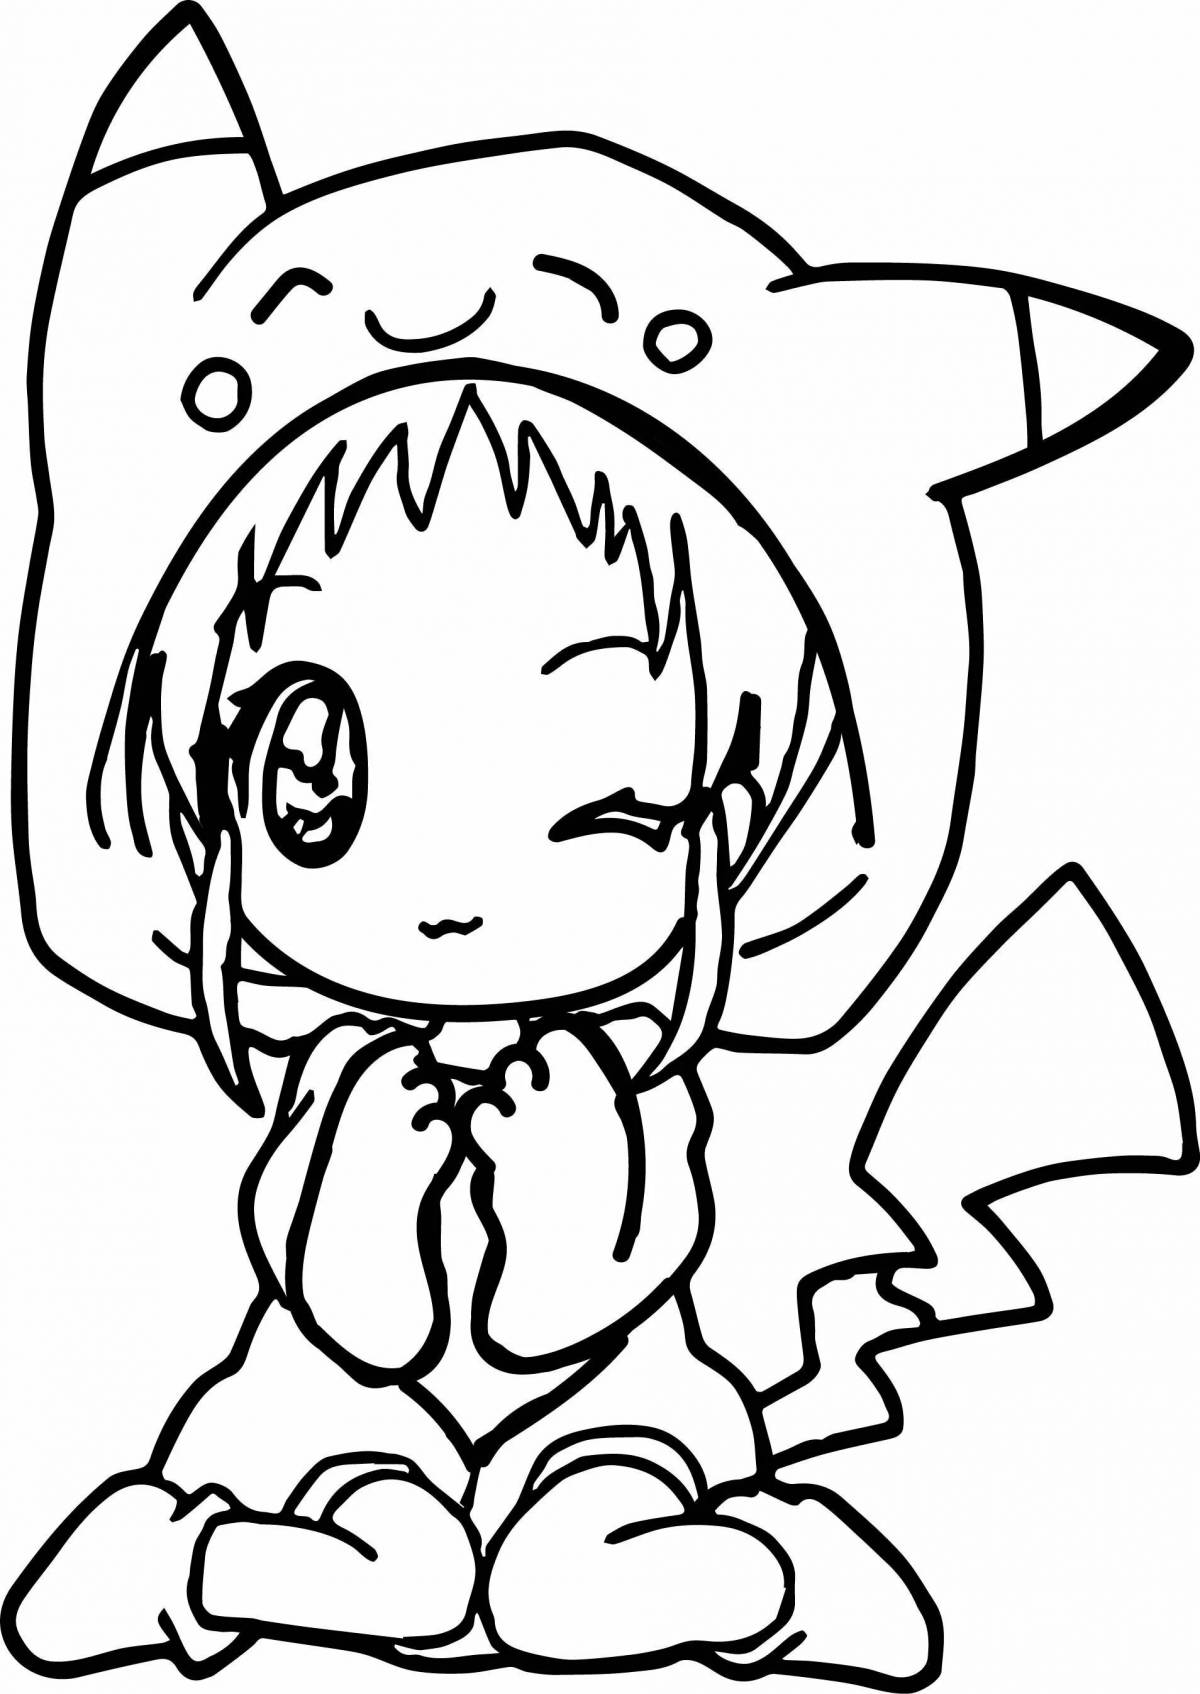 Extreme anime coloring pages for girls